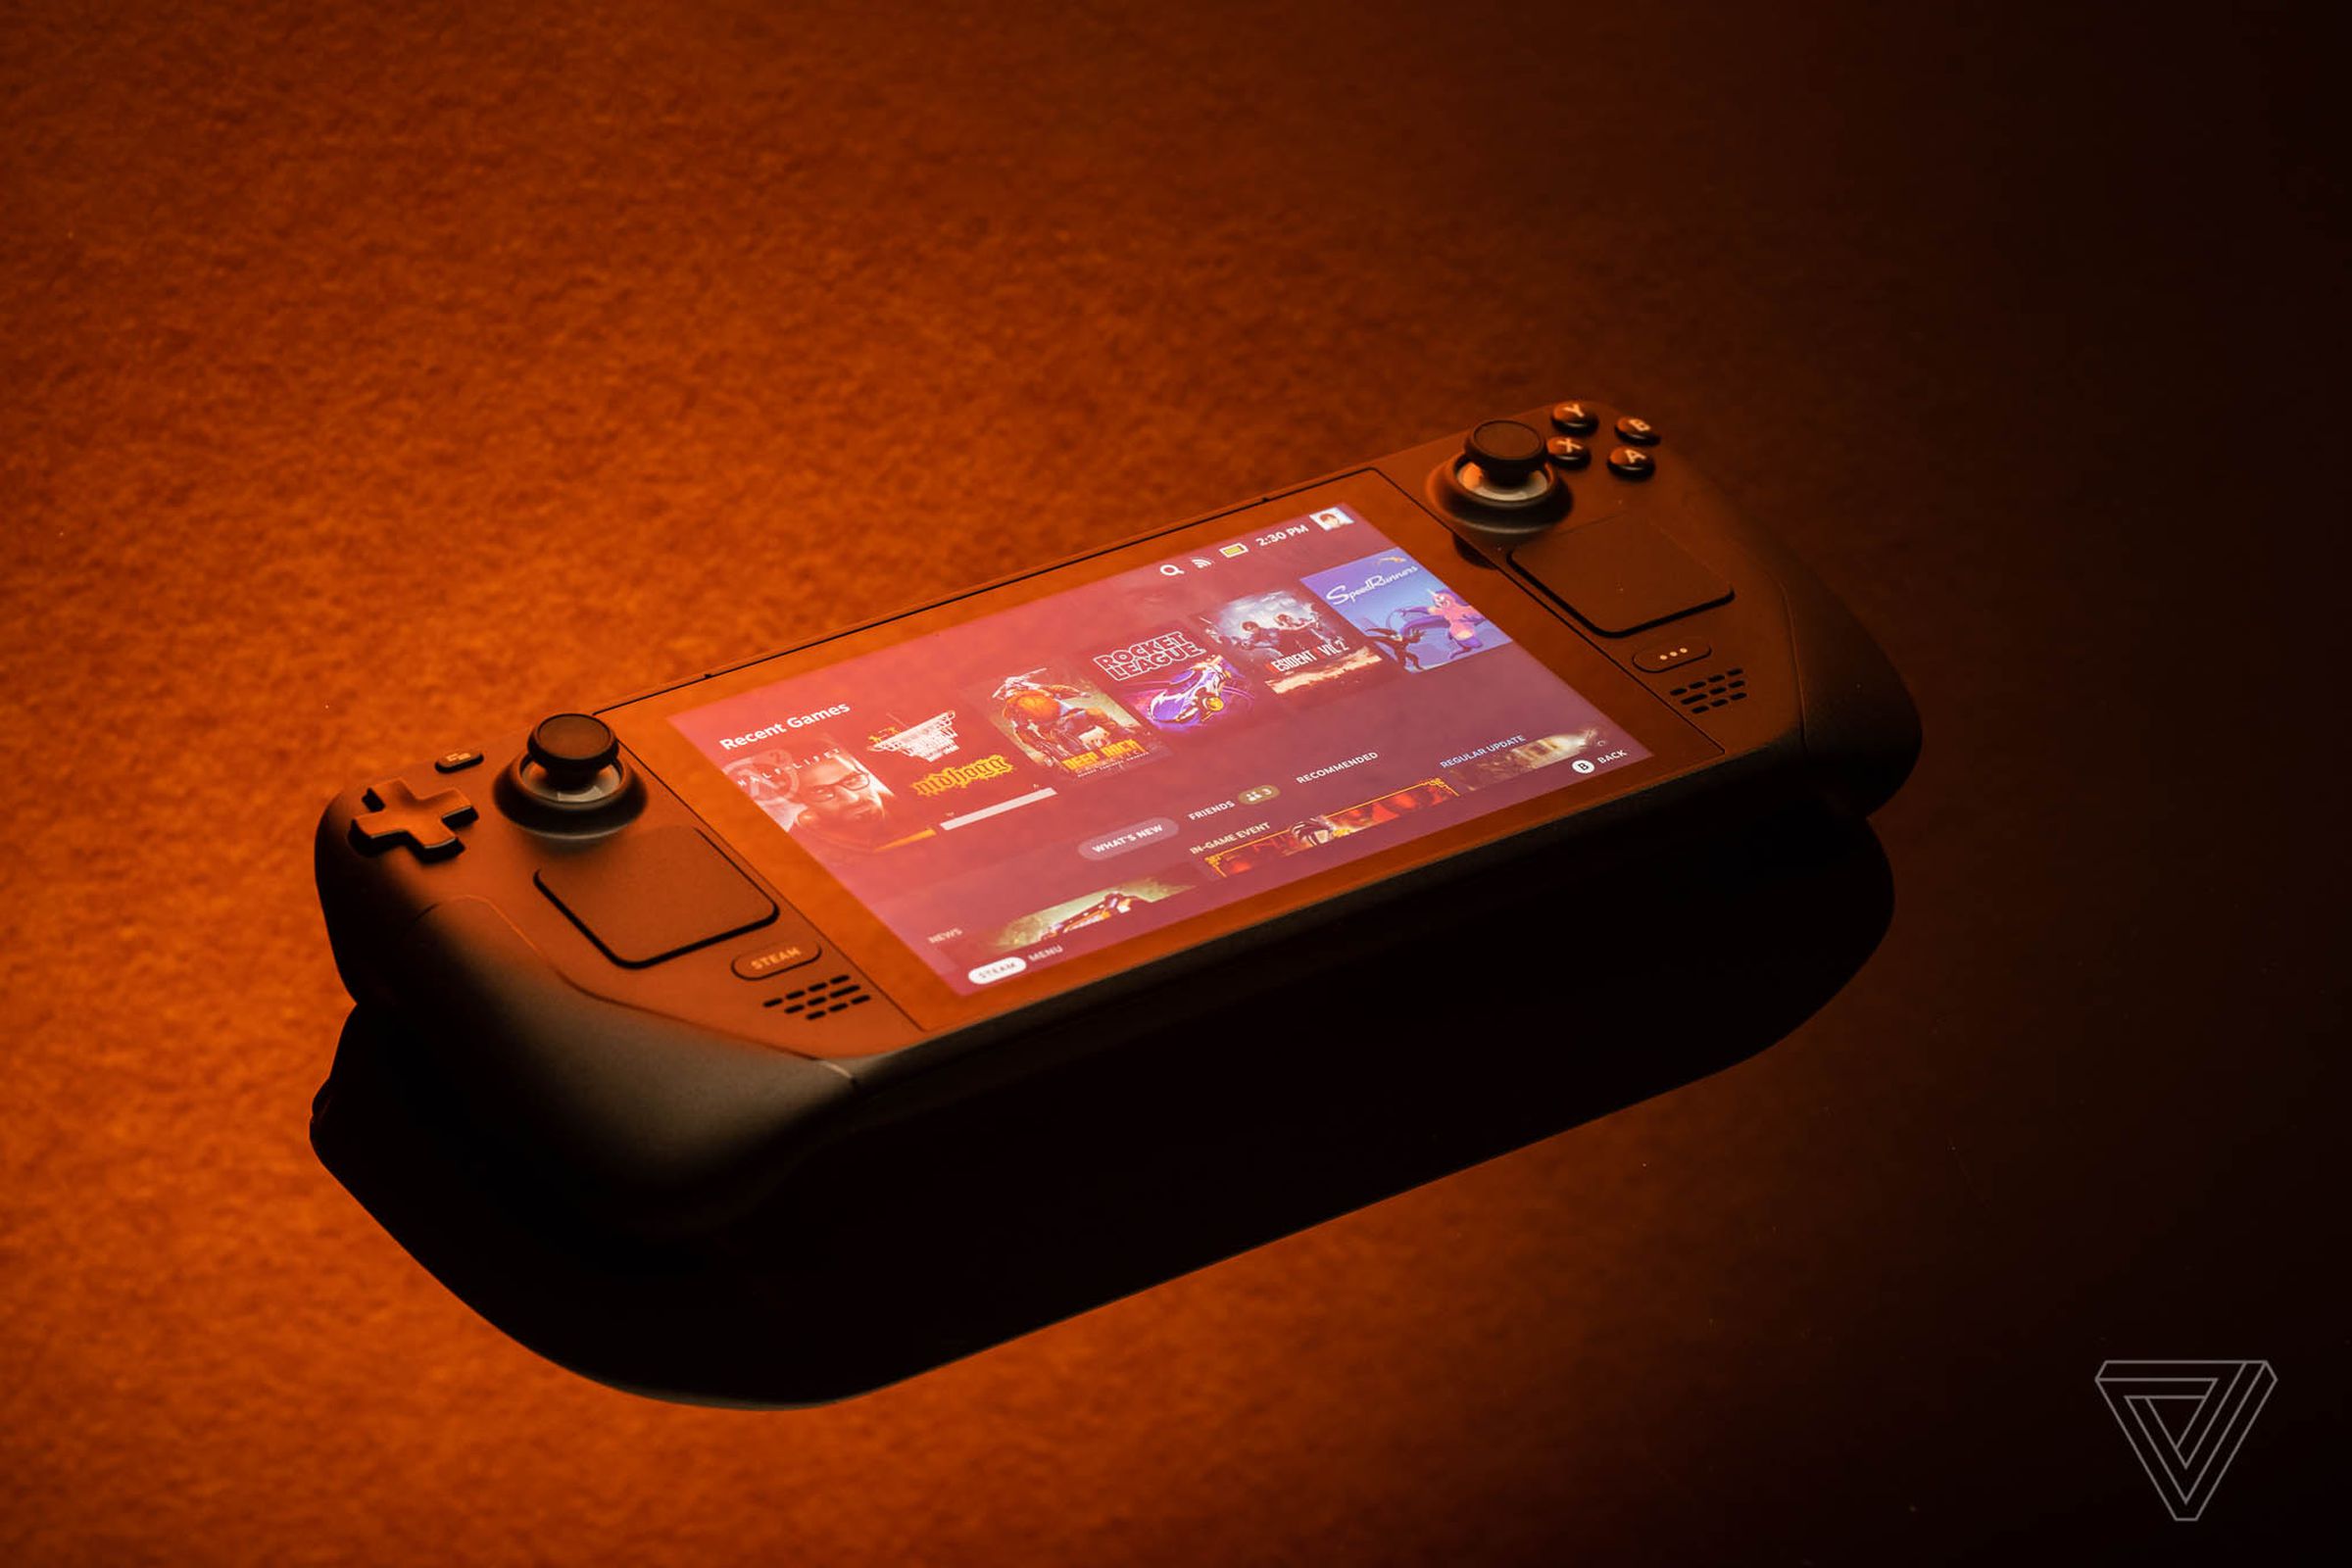 The Steam Deck gaming handheld, lit solely by orange light, giving a bit of a sunset or fire feel